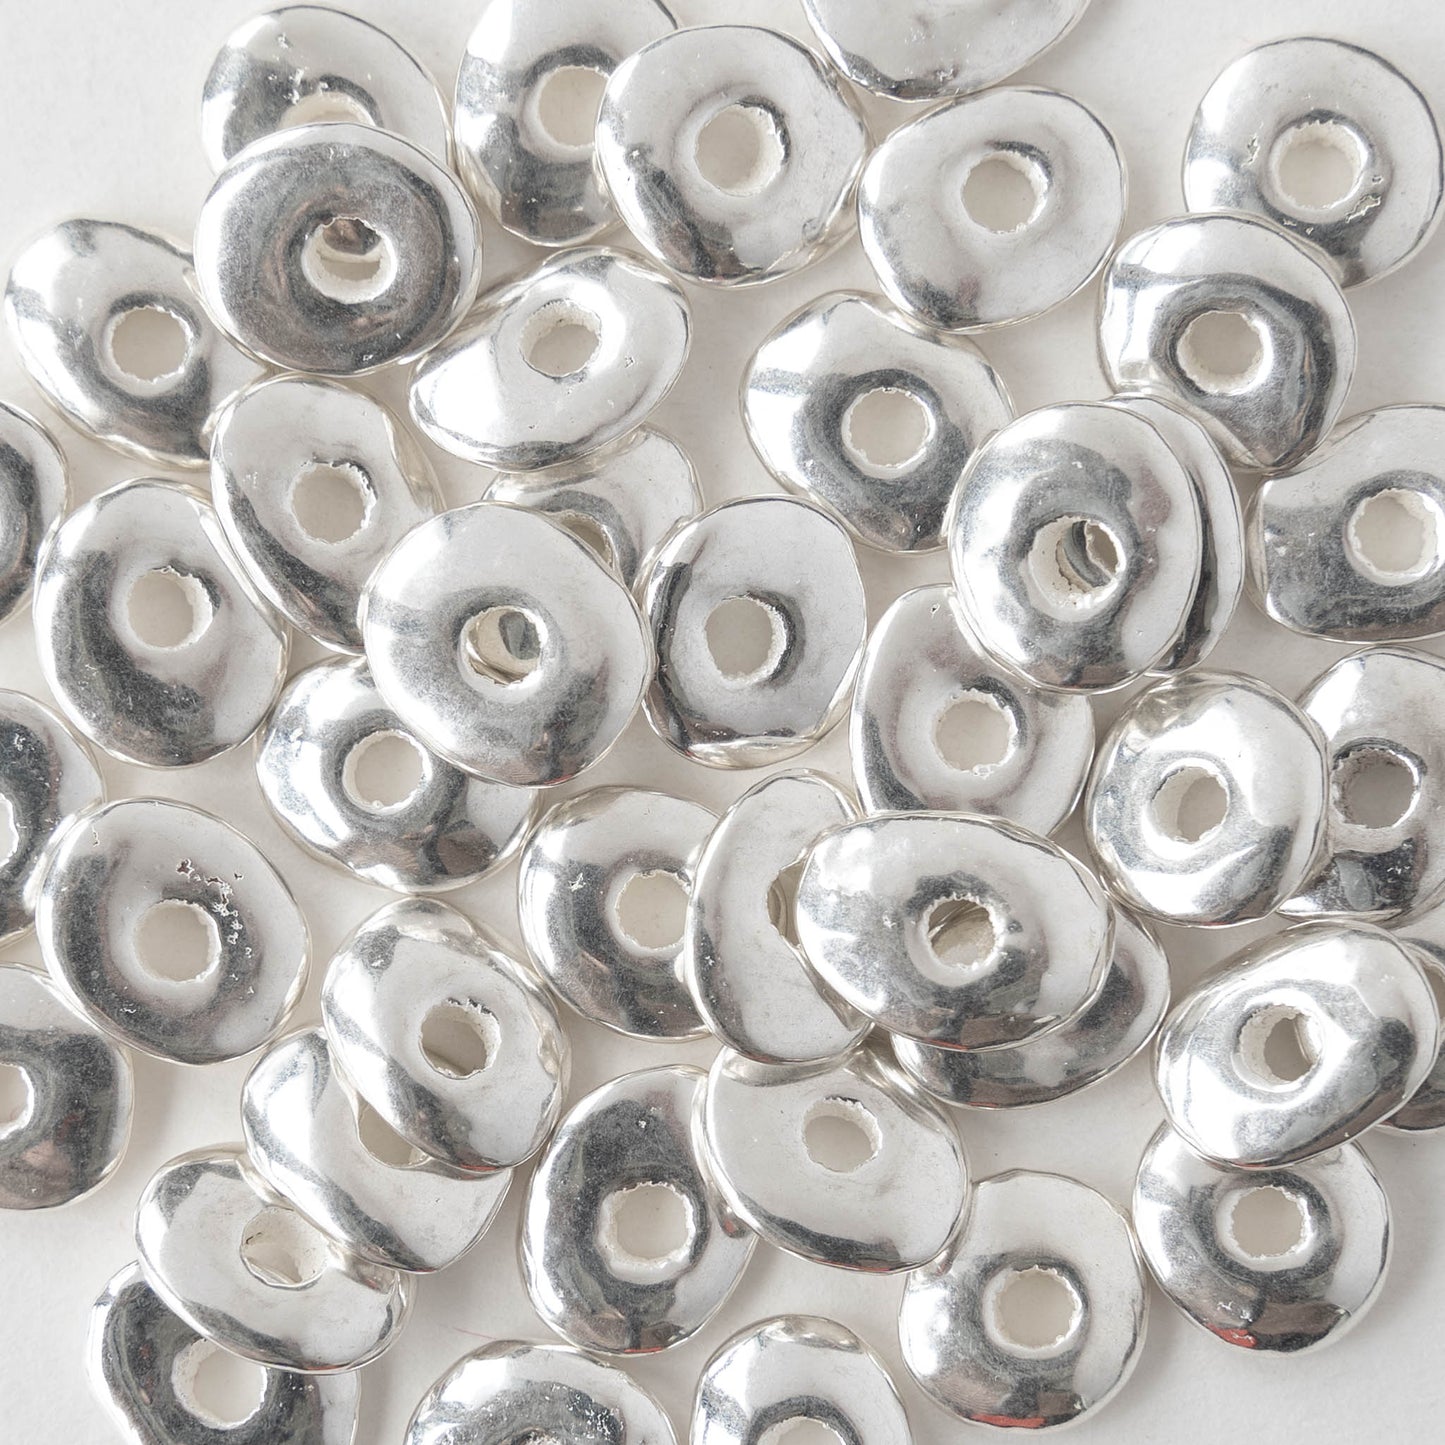 10x12mm Silver Coated Ceramic Beads - 10 or 30